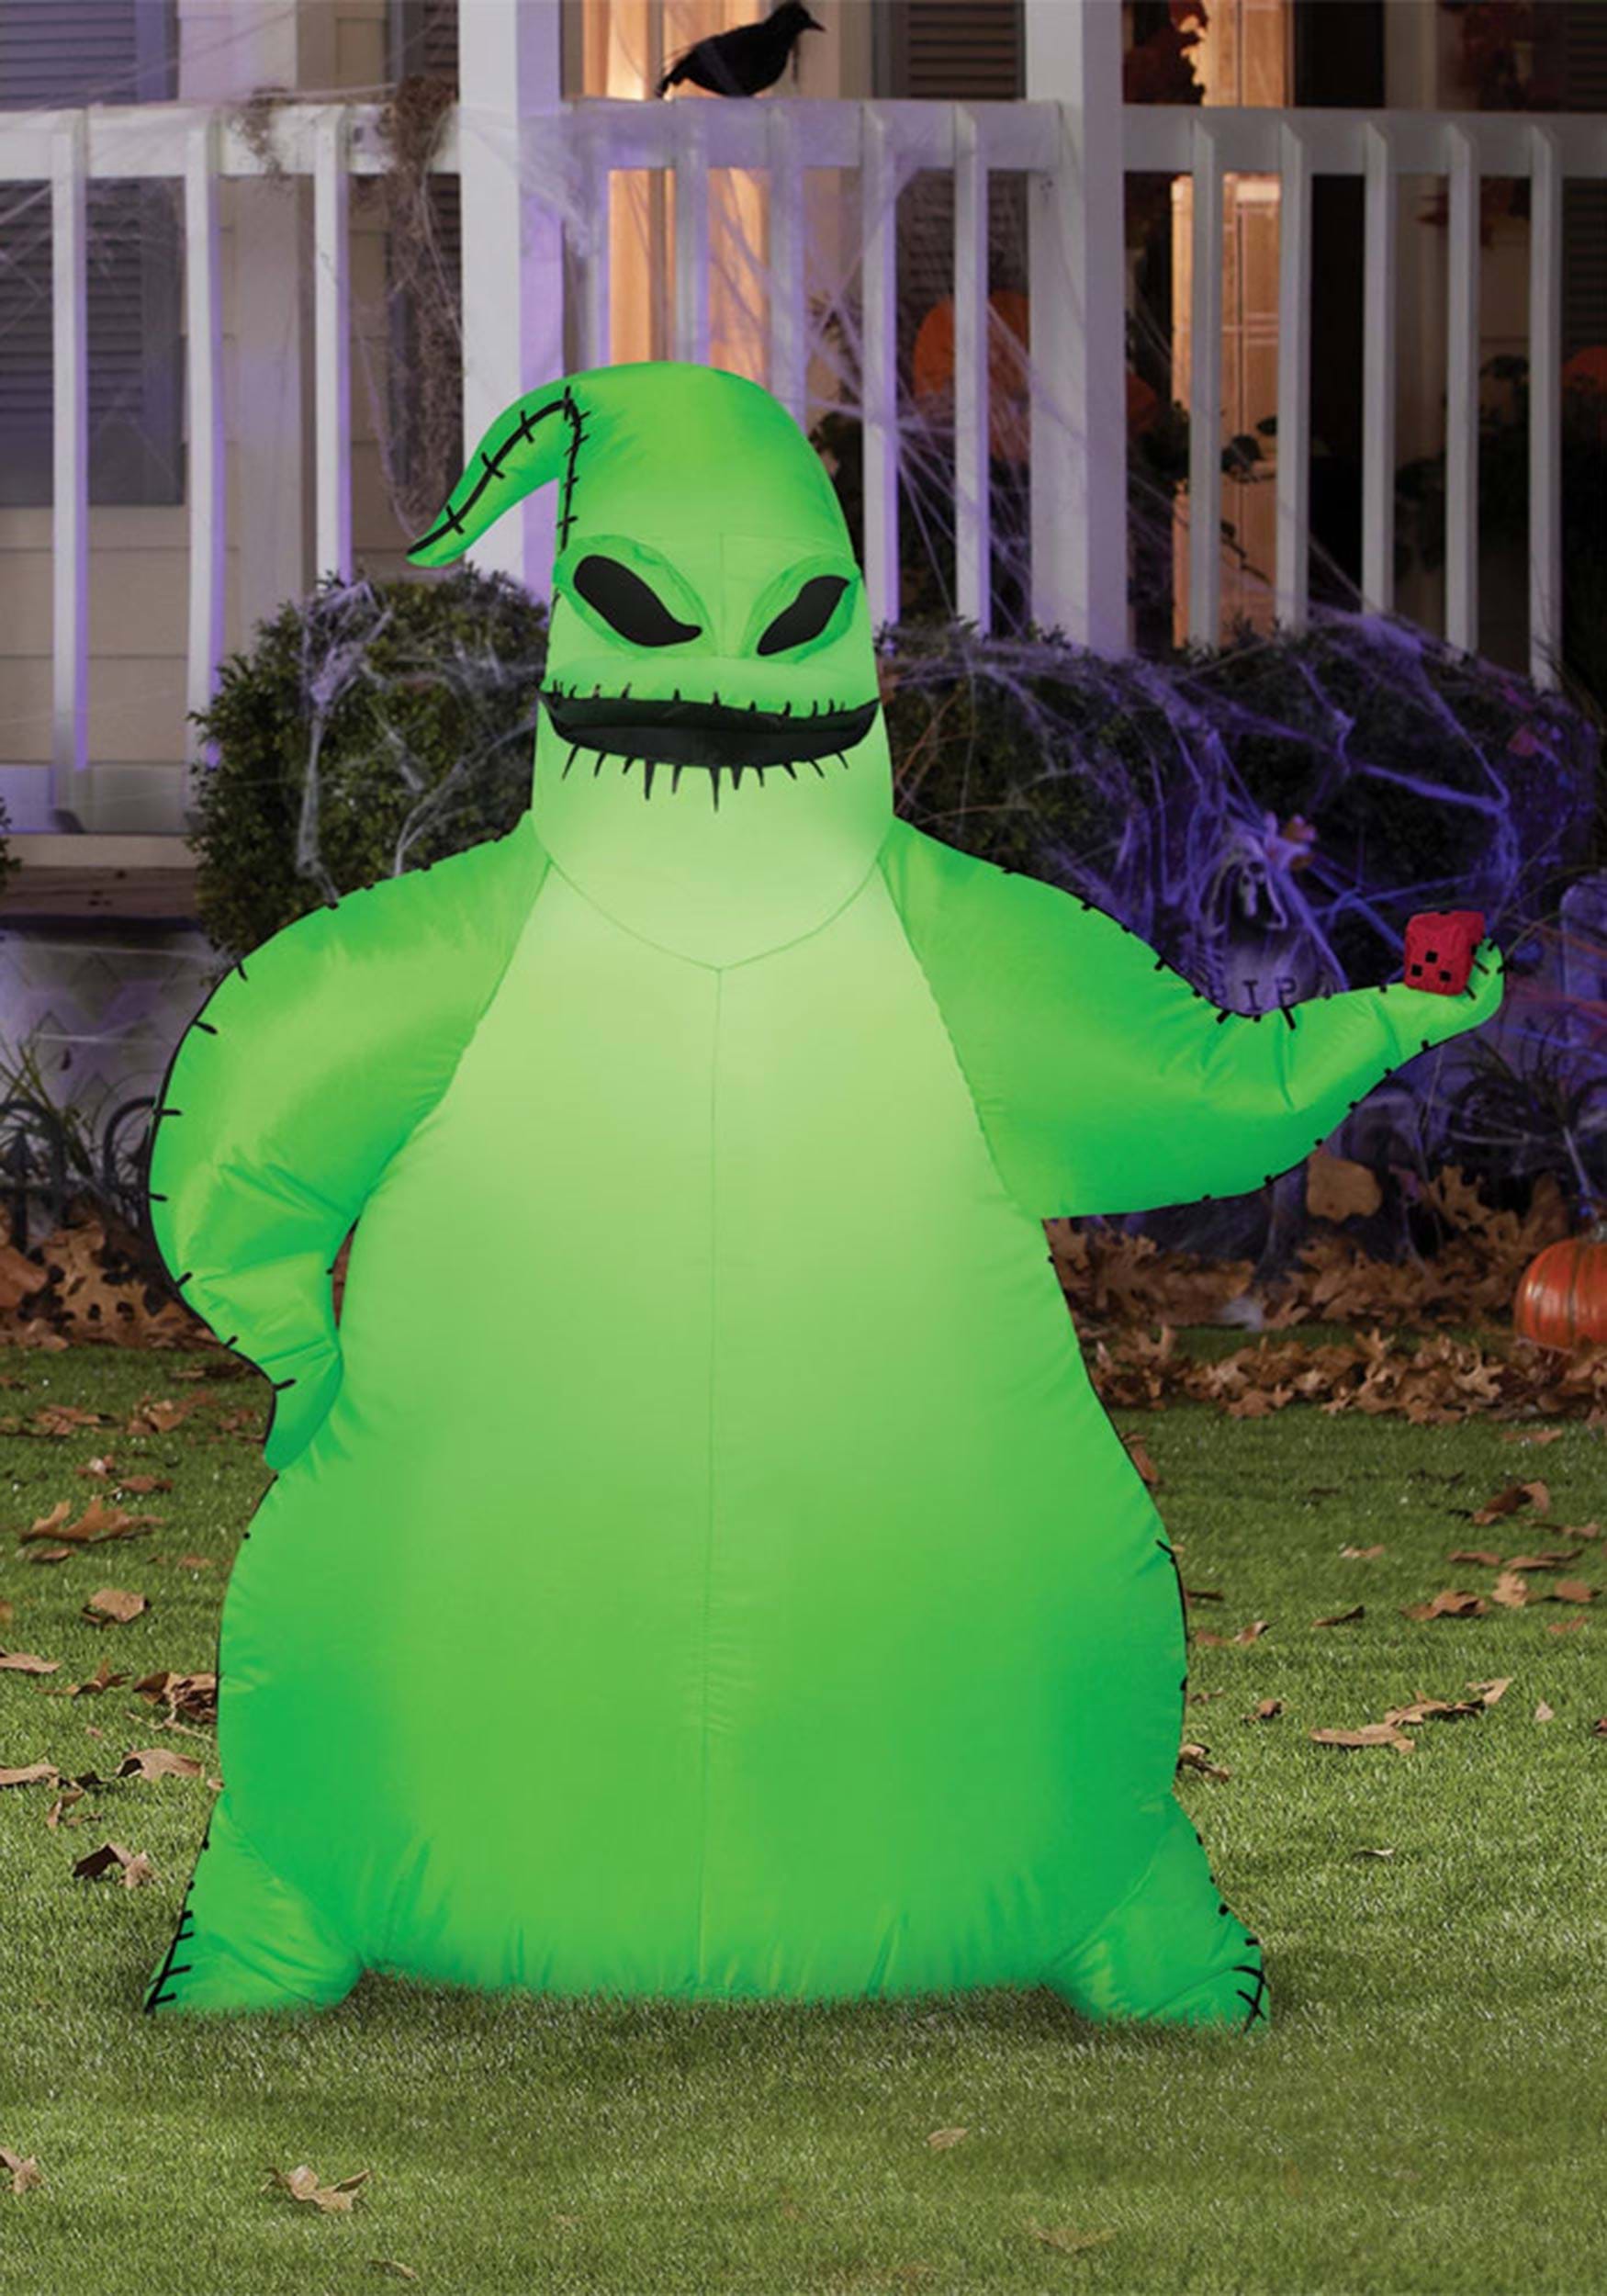 https://images.halloweencostumes.com/products/77172/1-1/42-airblown-green-oogie-boogie-medium-new.jpg